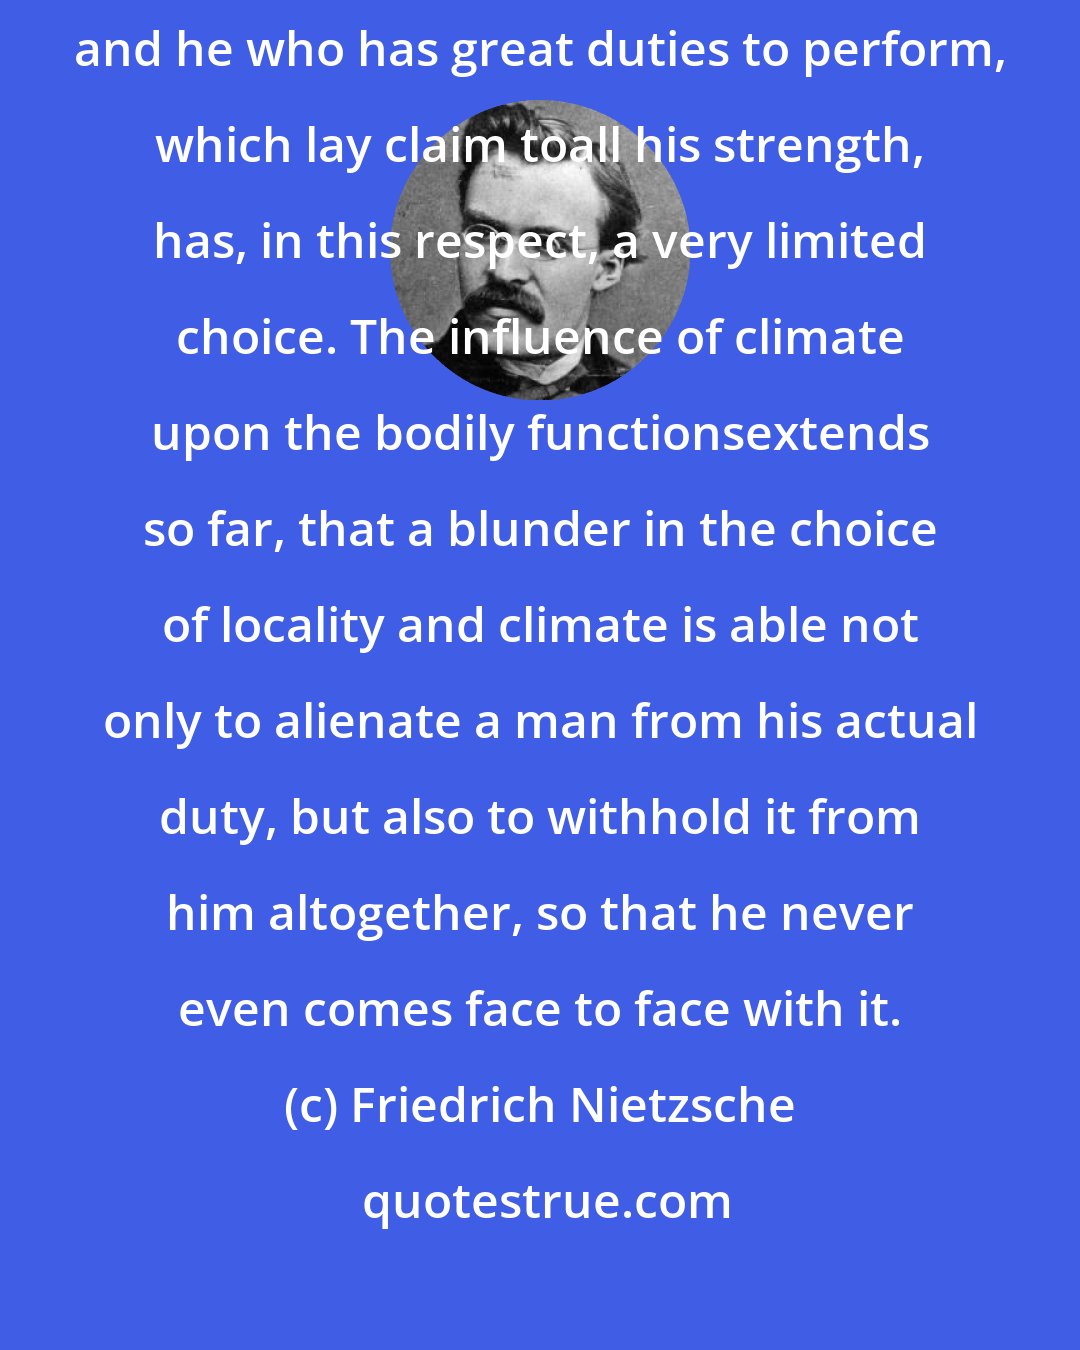 Friedrich Nietzsche: Nobody is so constituted as to be able to live everywhere and anywhere; and he who has great duties to perform, which lay claim toall his strength, has, in this respect, a very limited choice. The influence of climate upon the bodily functionsextends so far, that a blunder in the choice of locality and climate is able not only to alienate a man from his actual duty, but also to withhold it from him altogether, so that he never even comes face to face with it.